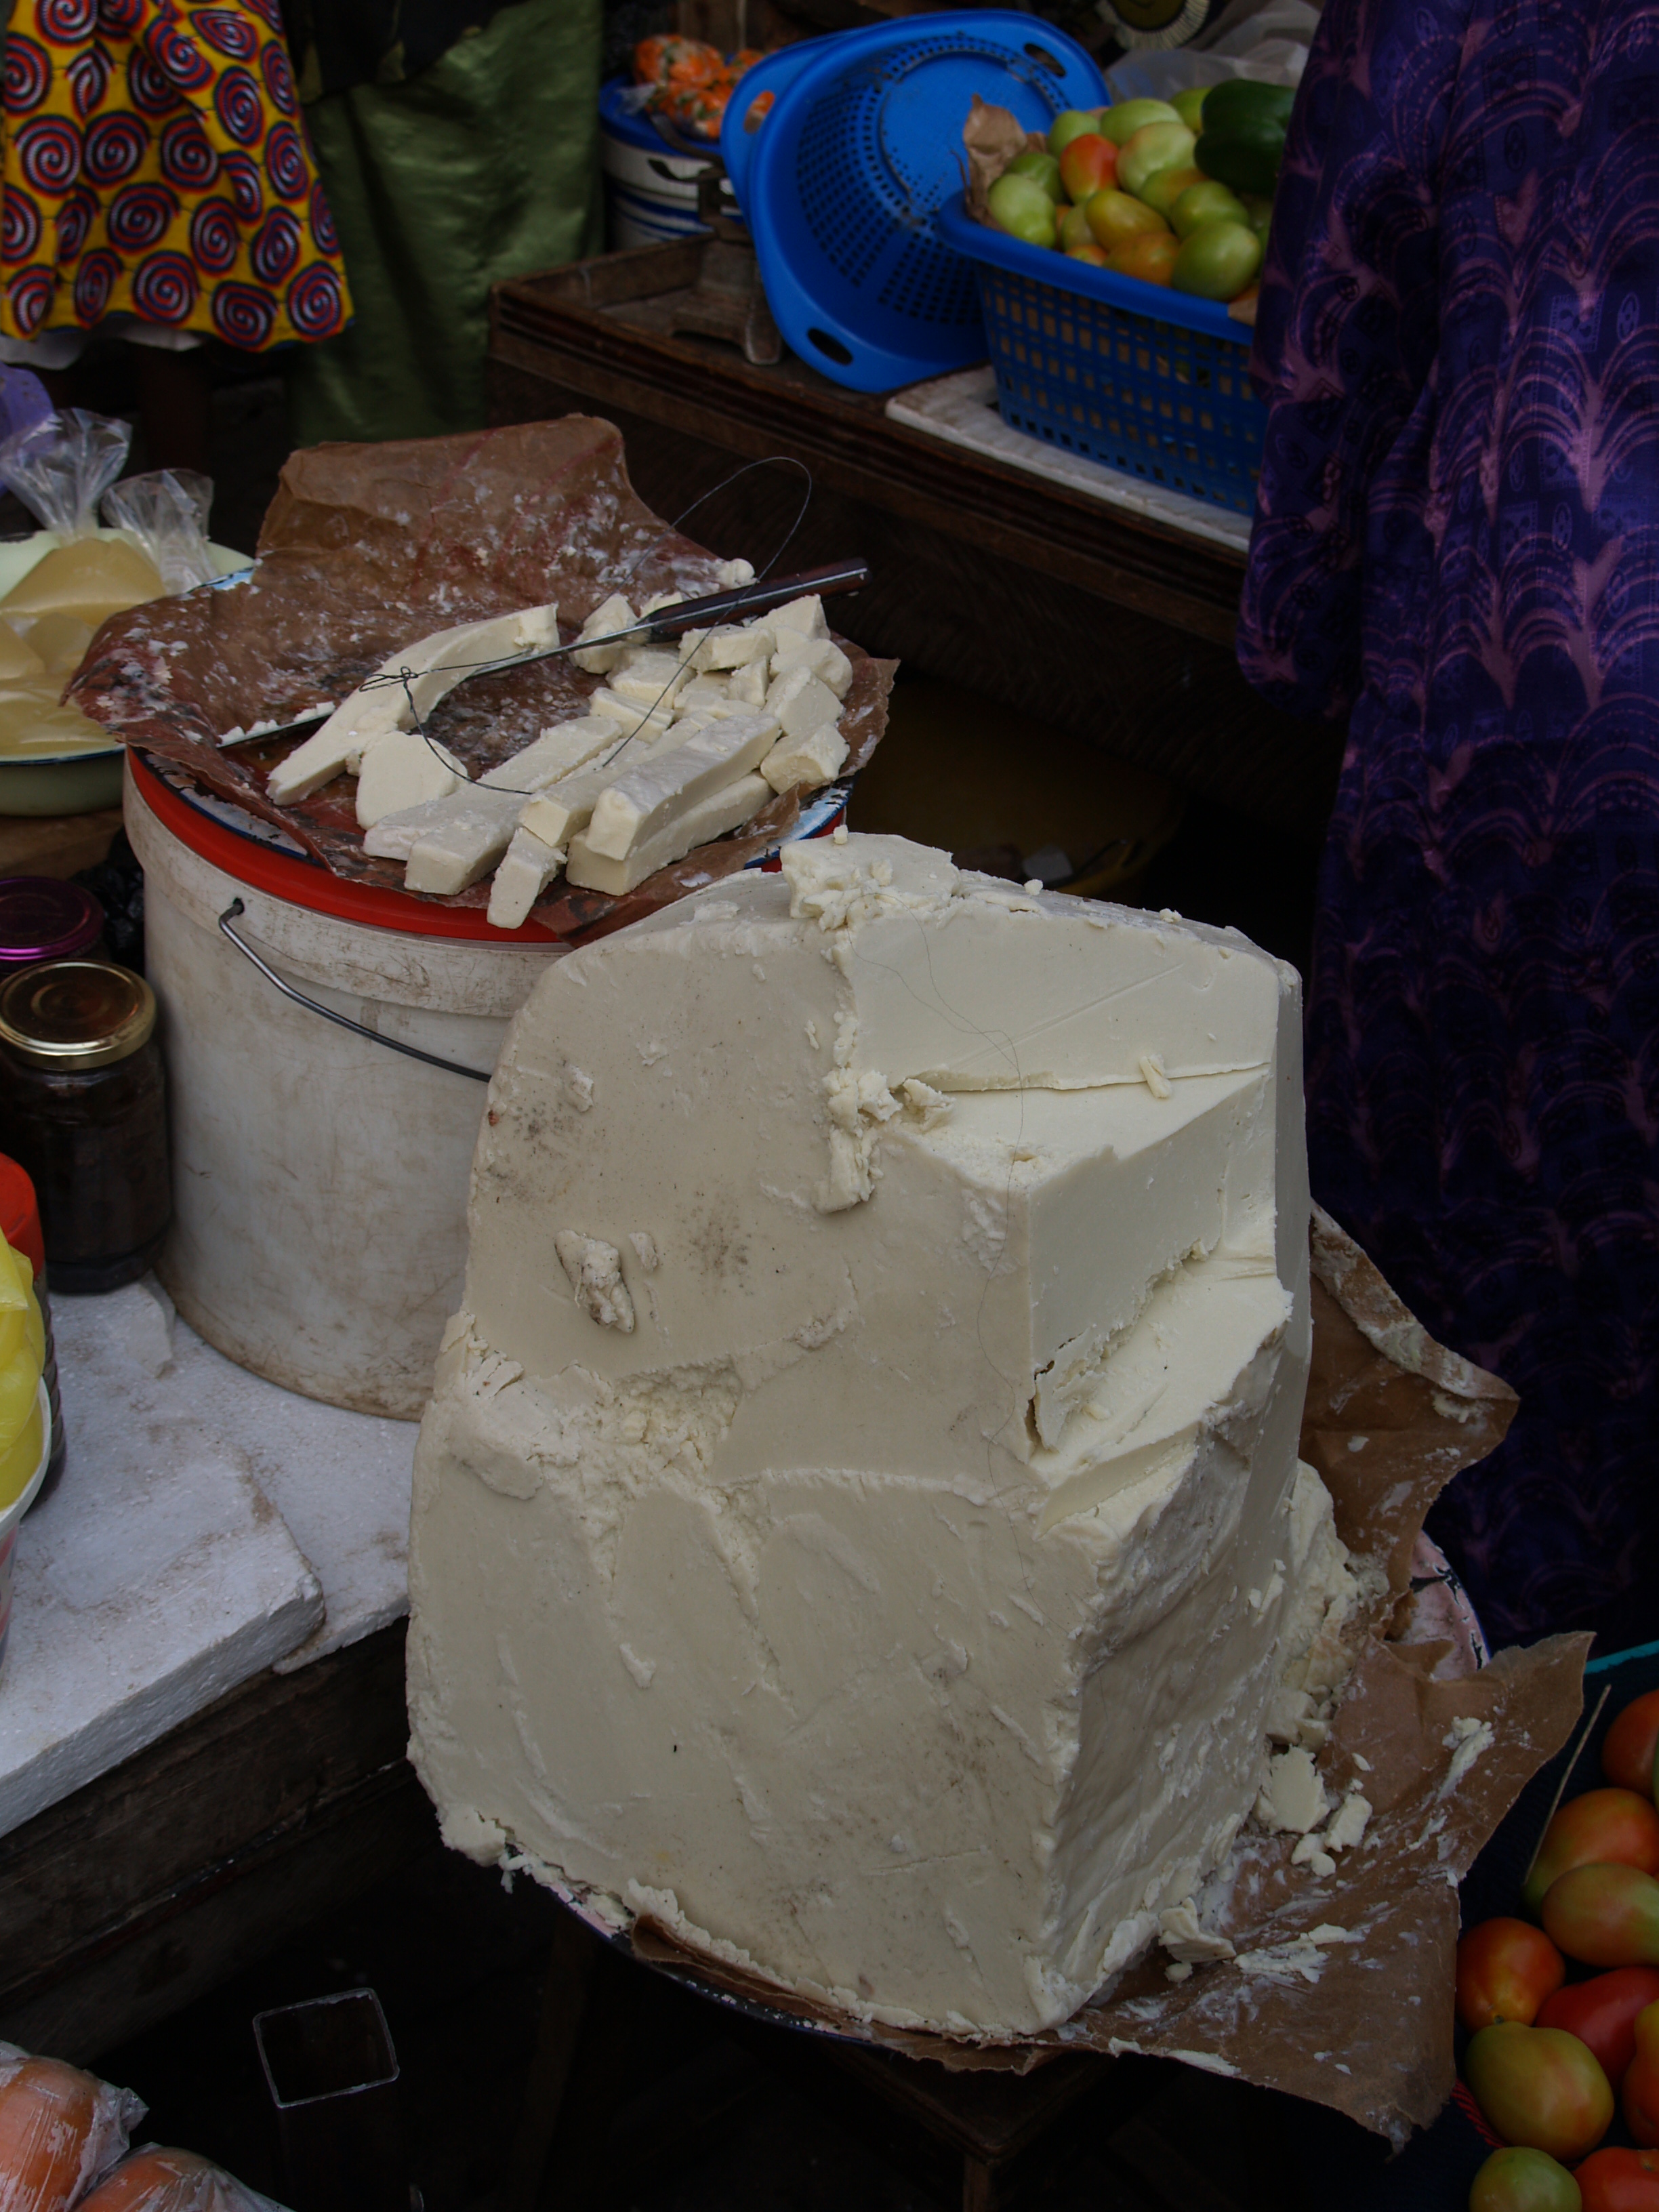 In much of the Sahel, shea butter is an invaluable resource for women.